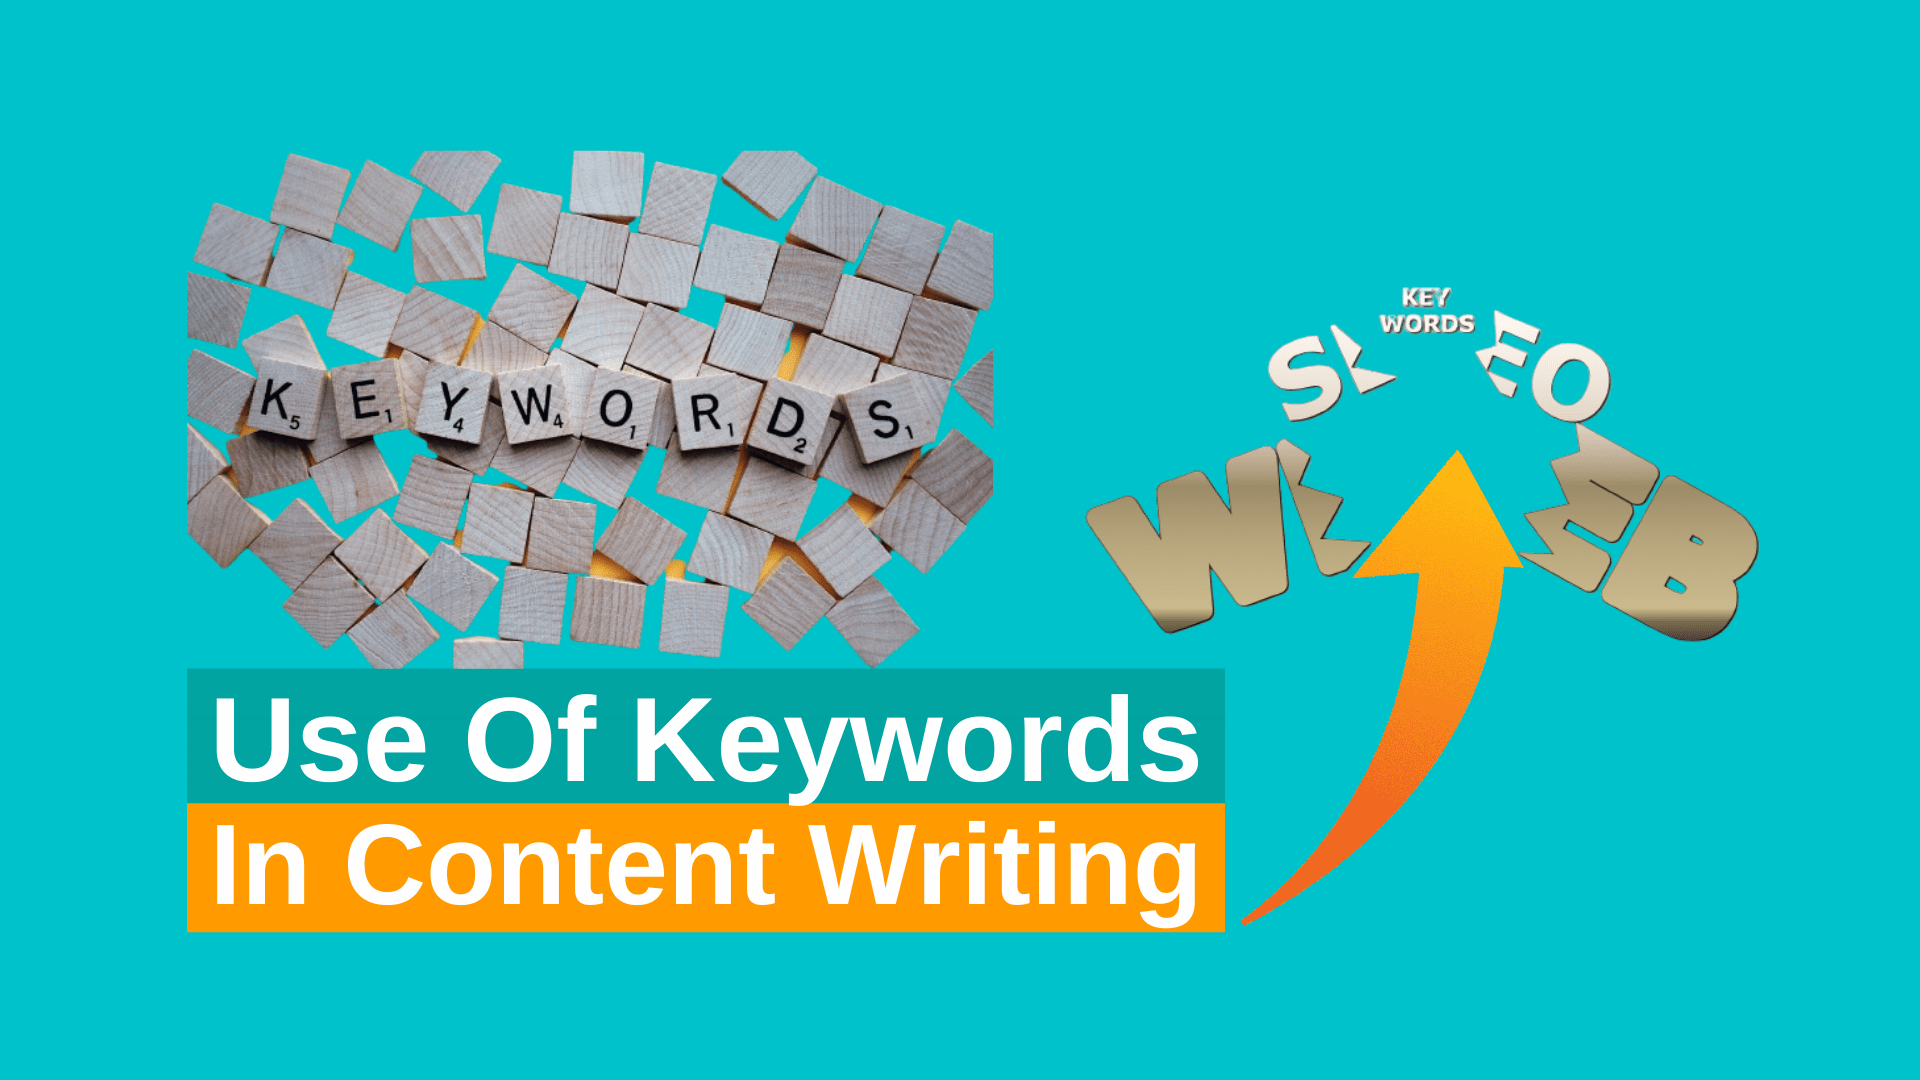 How to Use Keywords in Content Writing